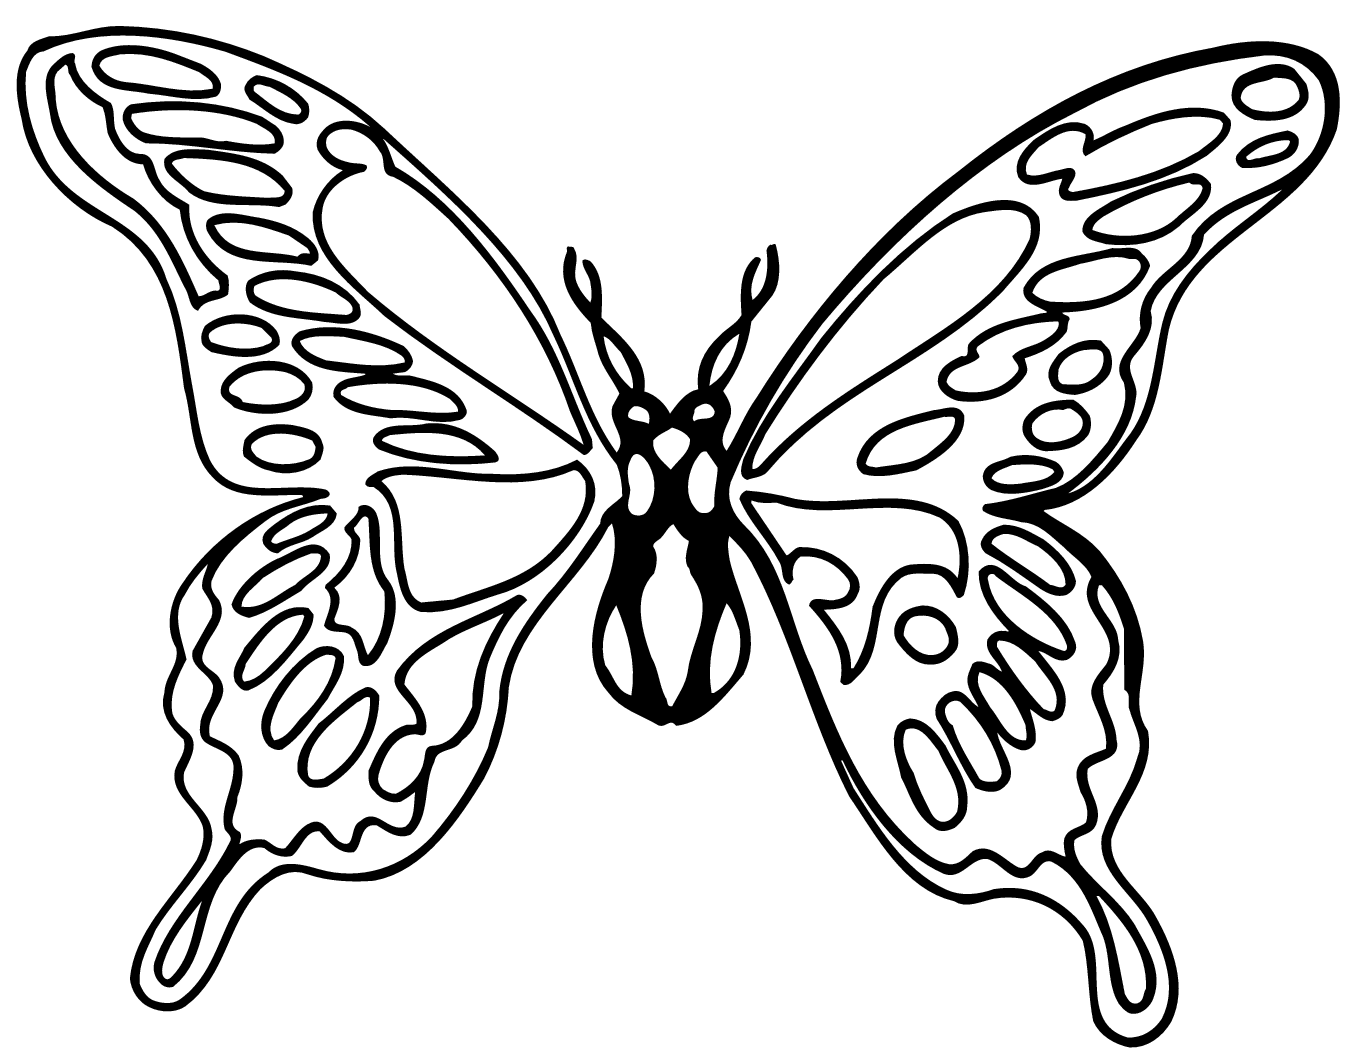 Free Butterfly Images Black And White, Download Free Clip